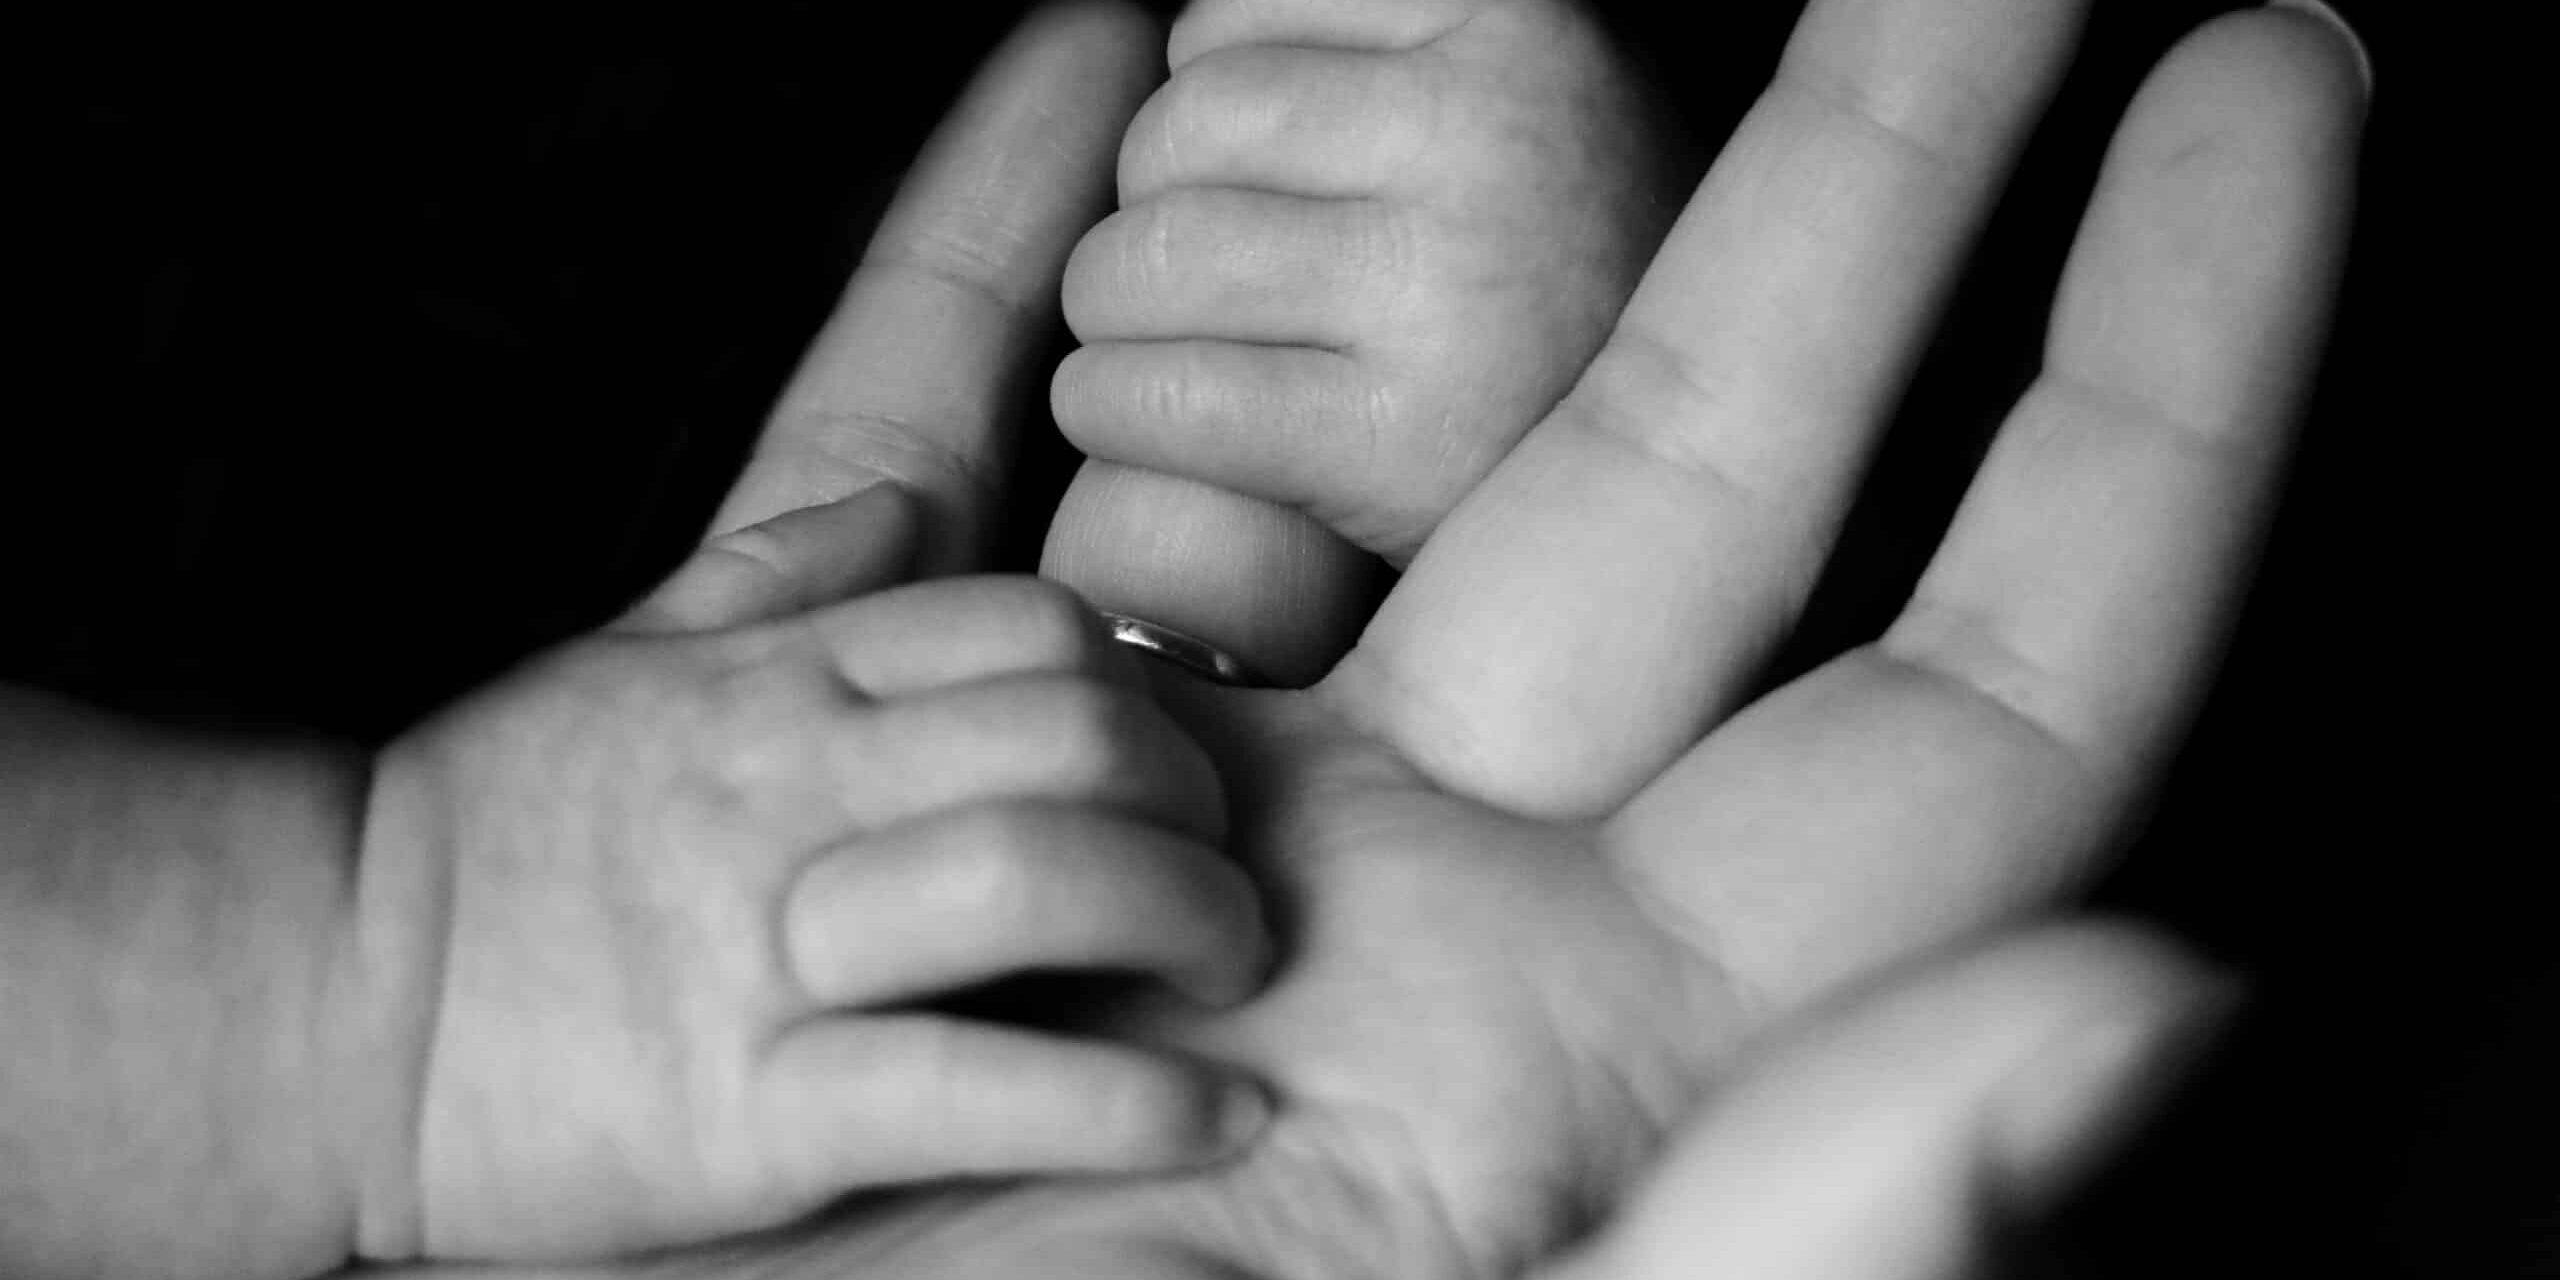 Two baby hands hold onto the hand of an adult